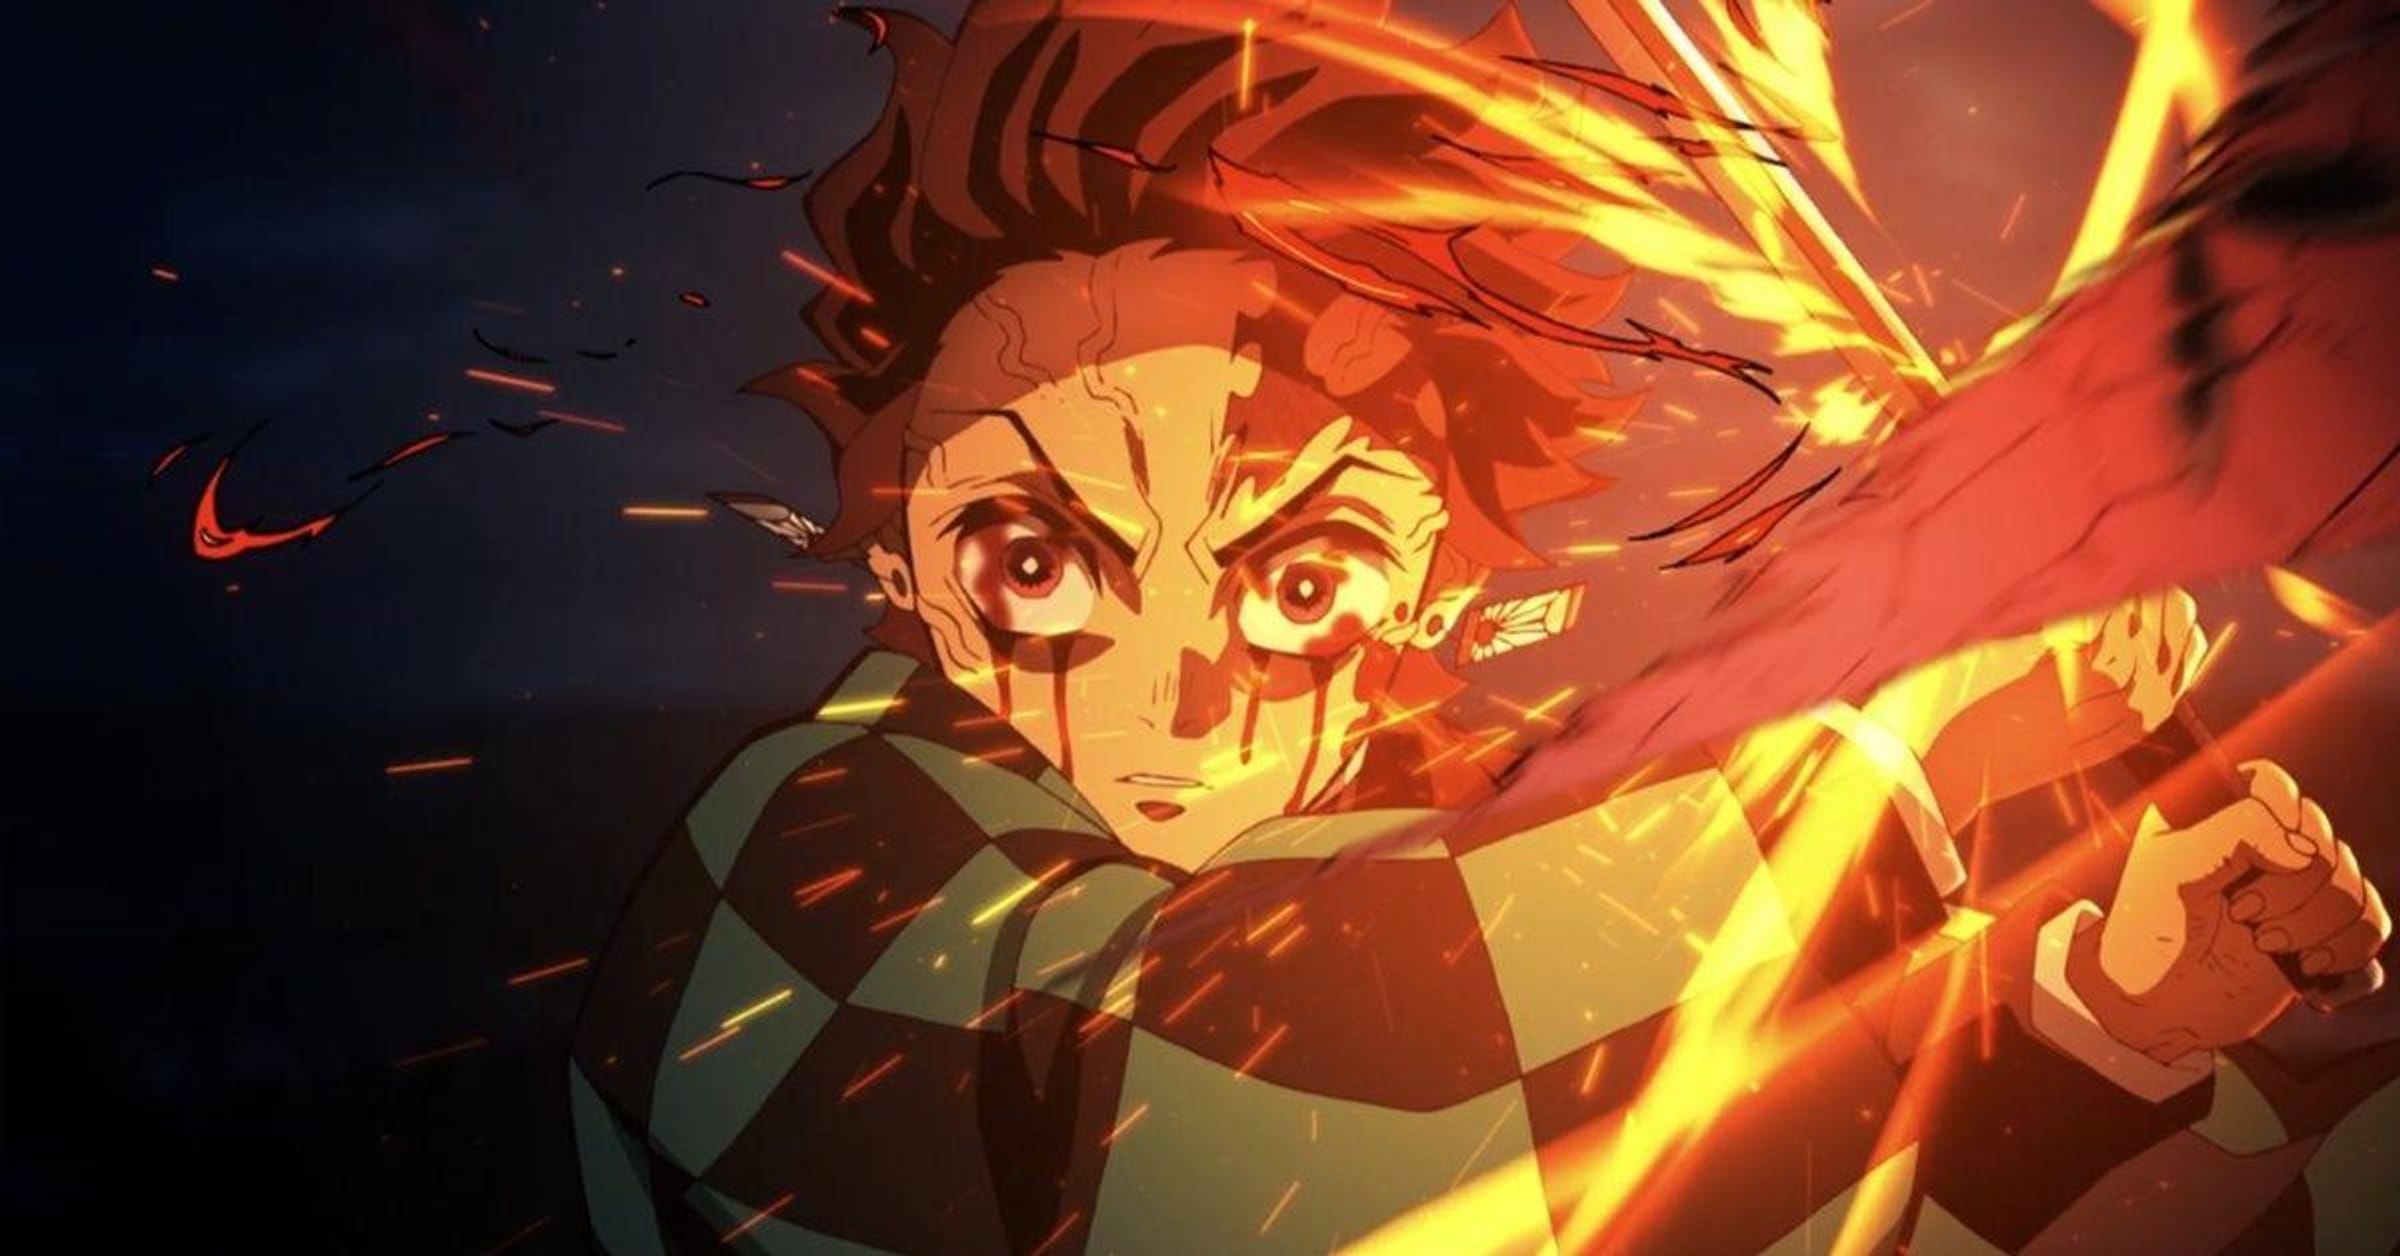 The 50+ Best Action Anime Of All Time, Ranked By Fans